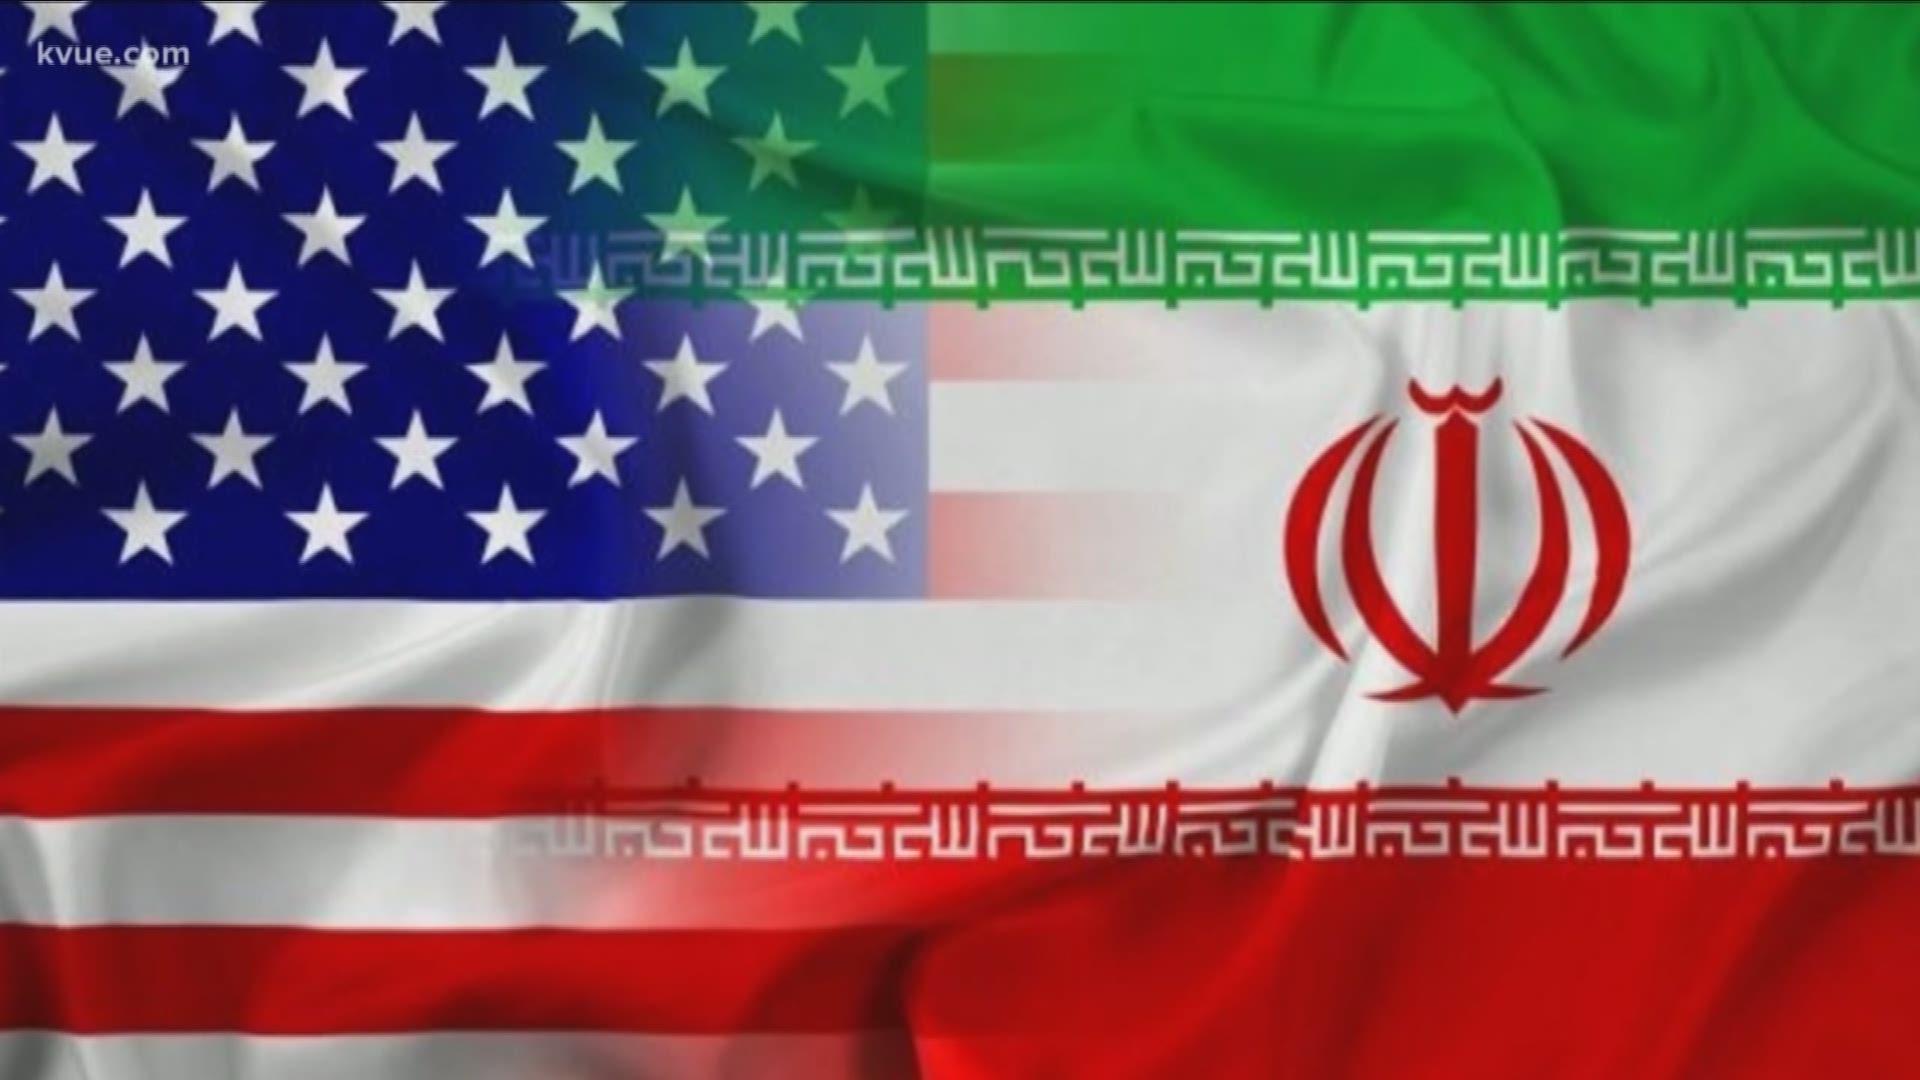 The U.S. and Iran have a complicated history.